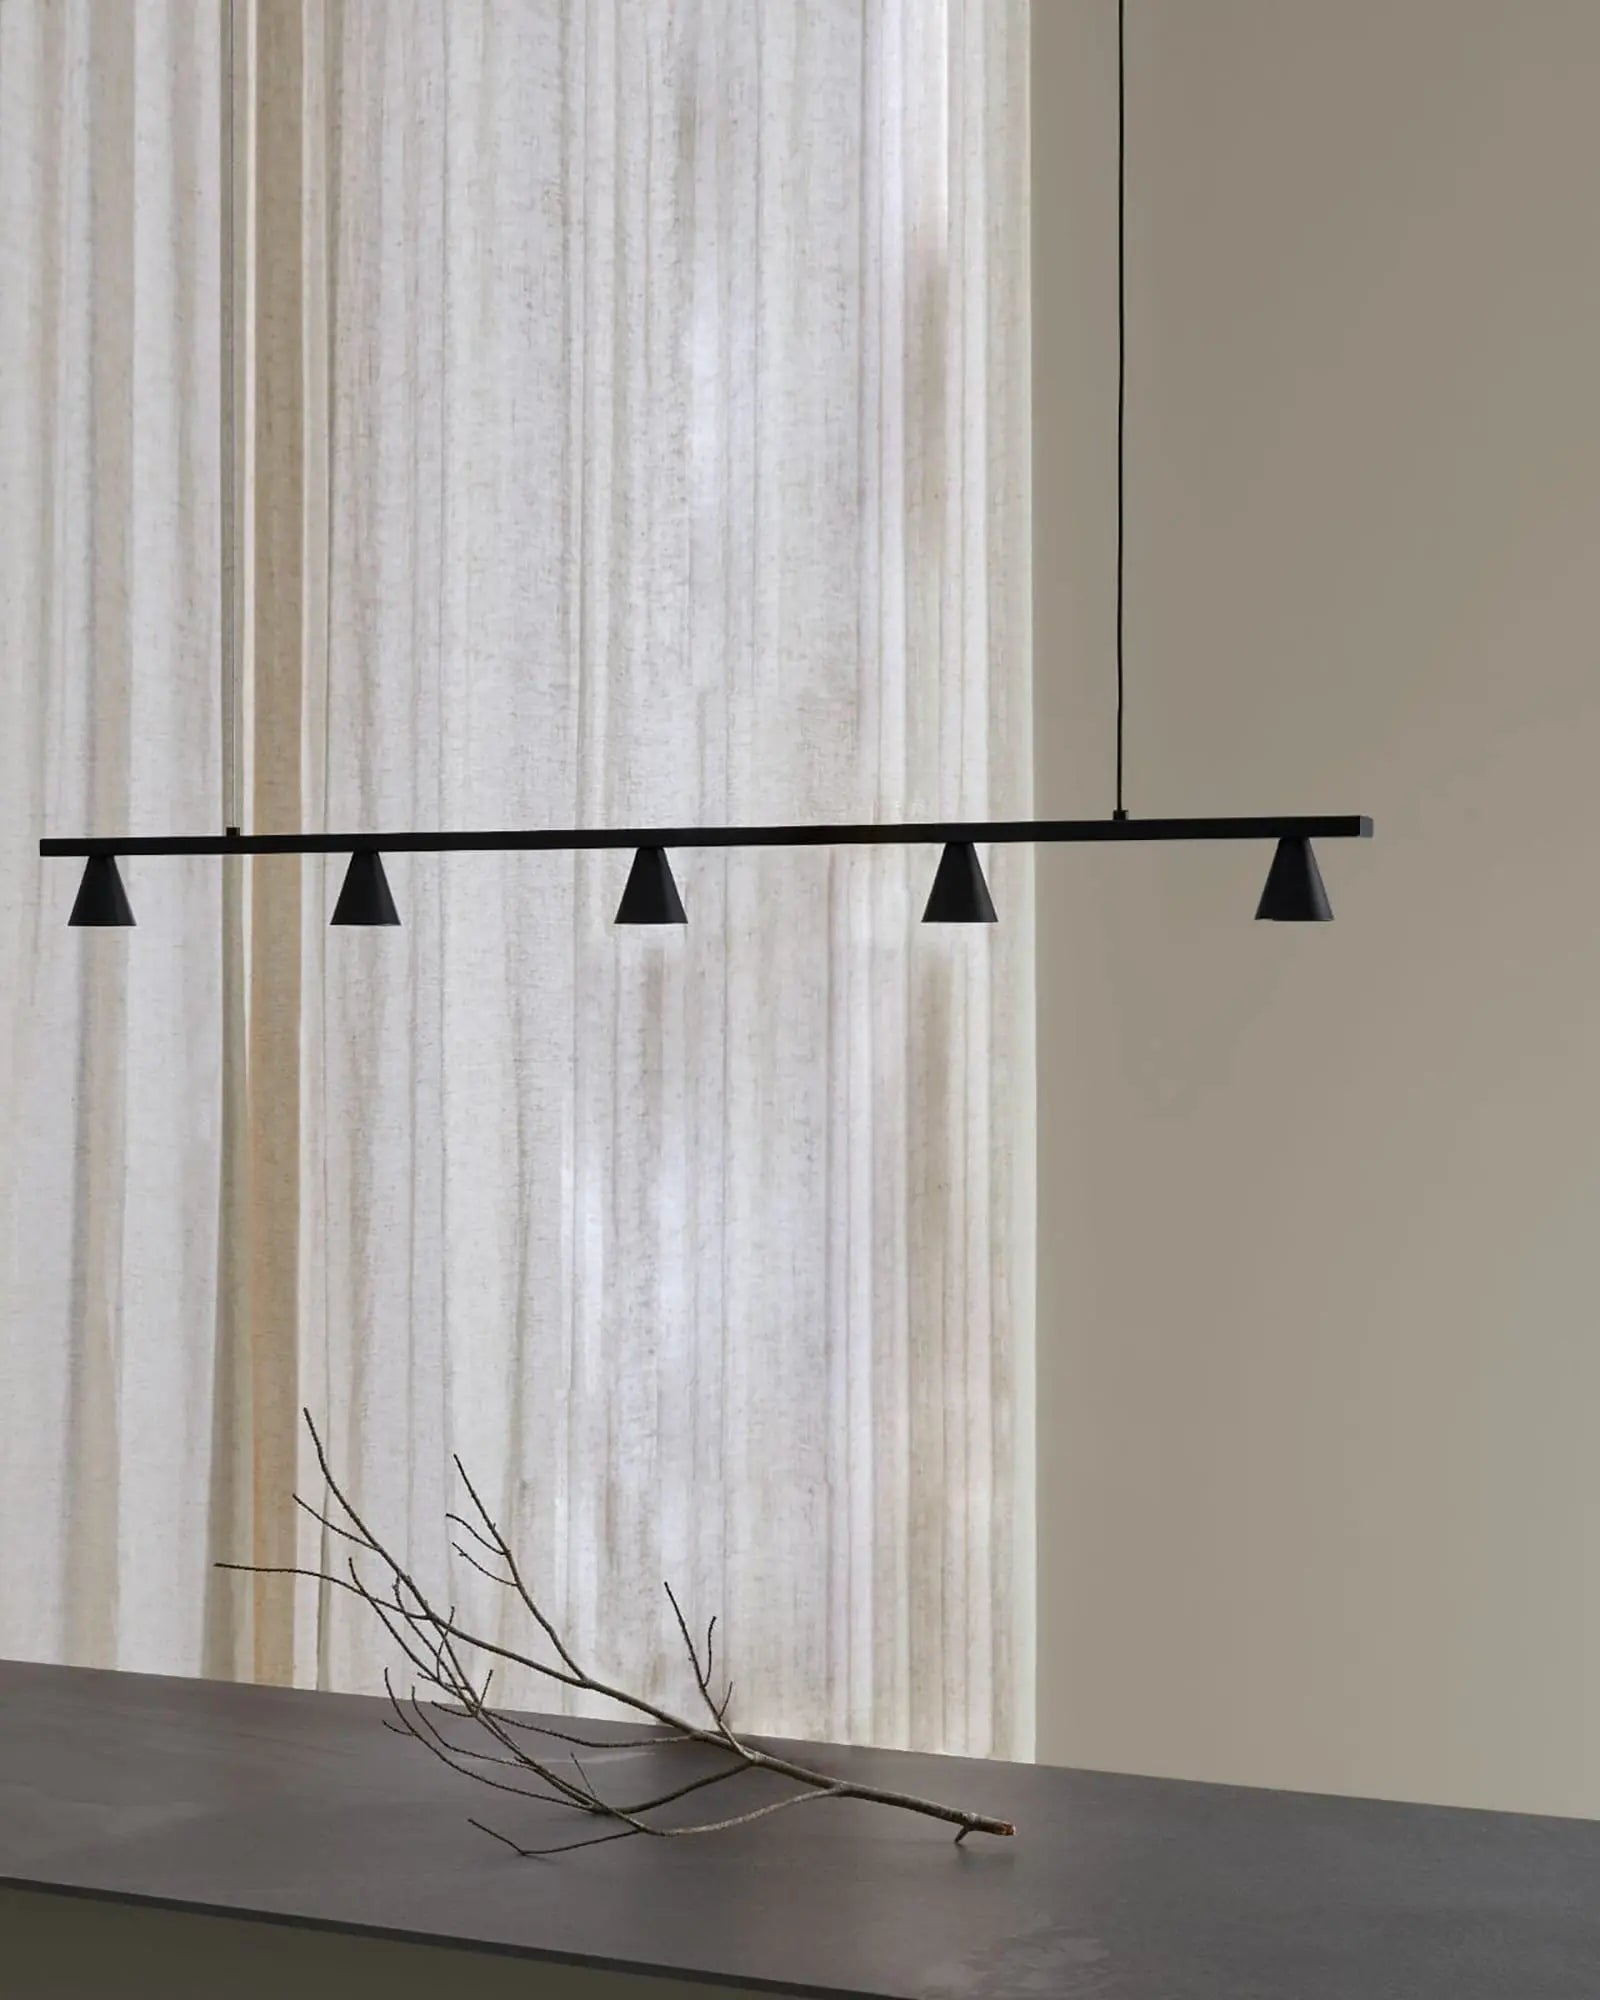 Lyb linear contemporary 5 lights pendant light with conic shades on a dining table